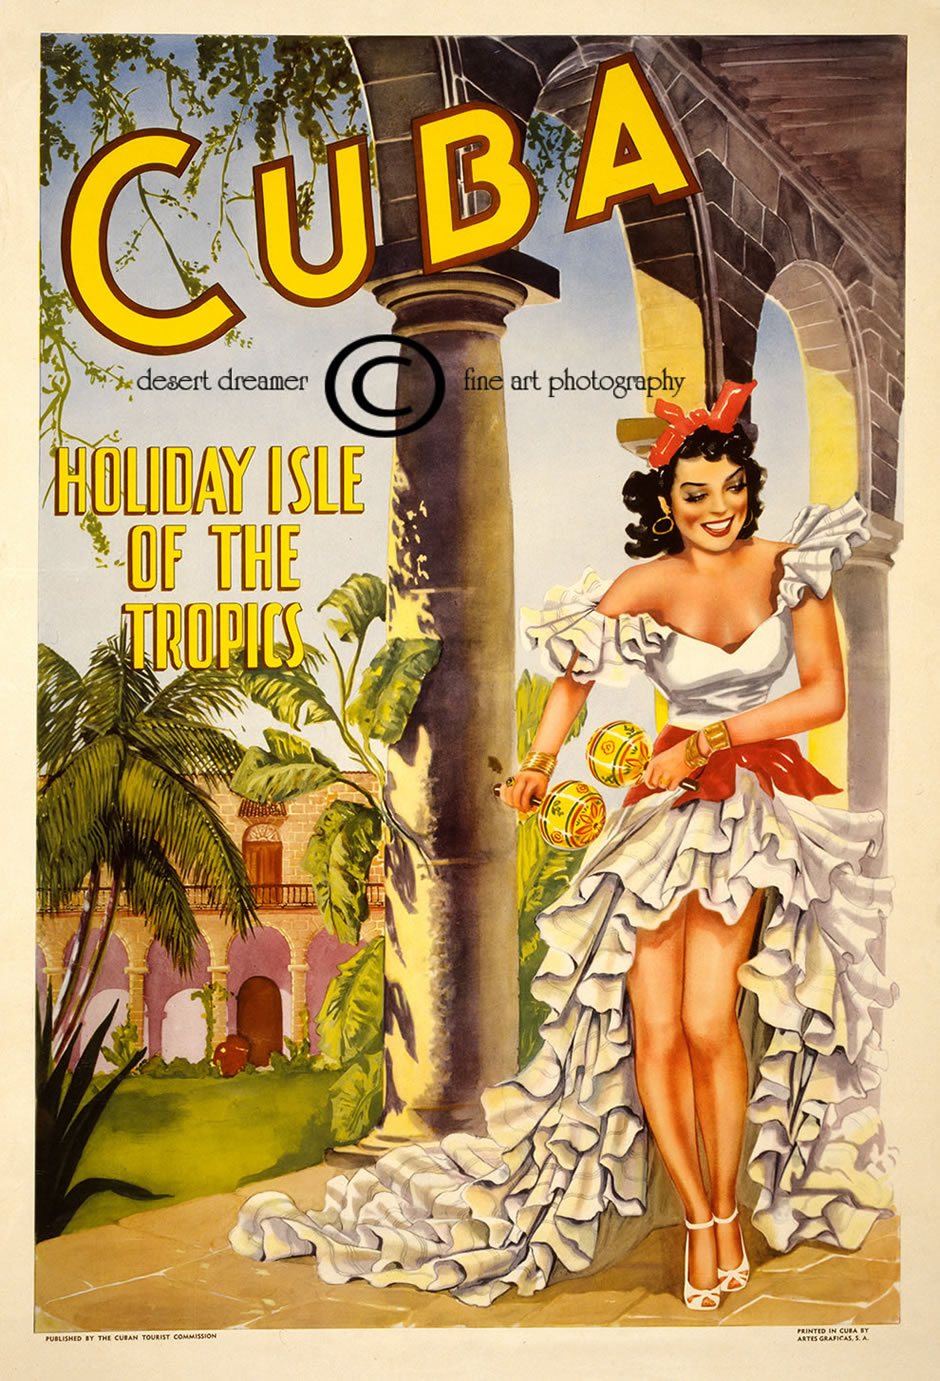 Vintage Posters Reproductions 34